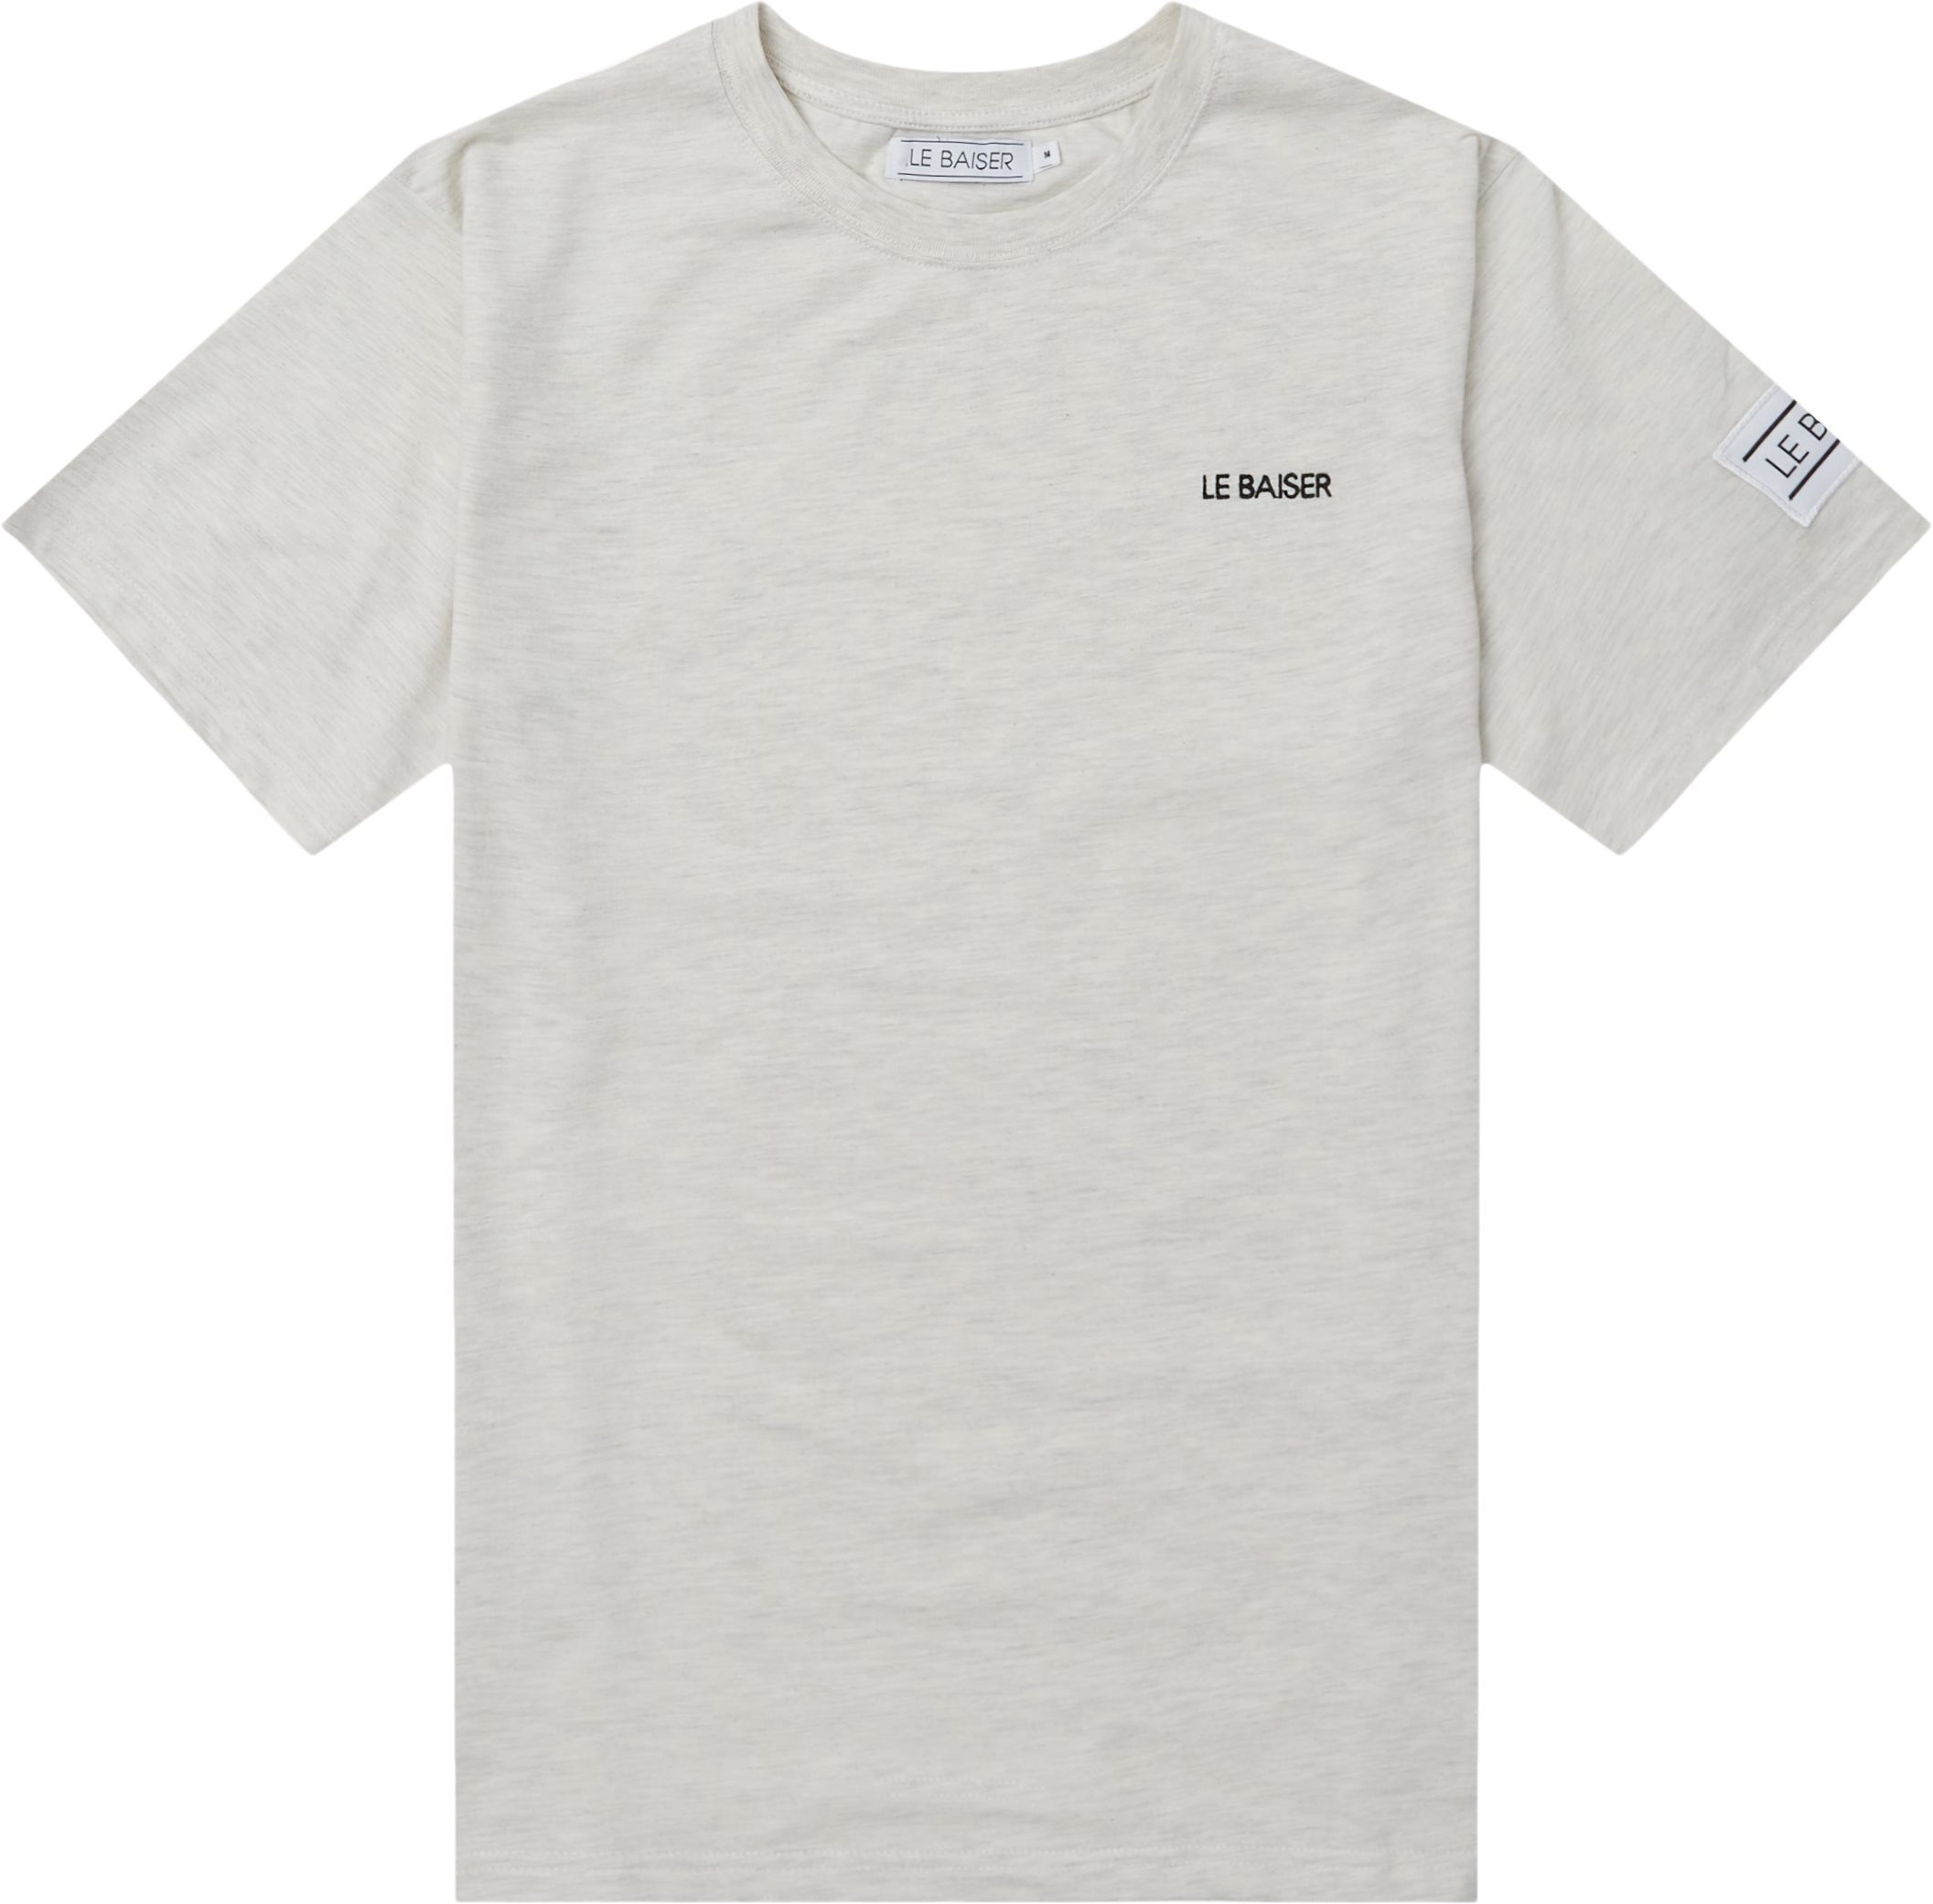 Bourg Tee - T-shirts - Regular fit - Sand